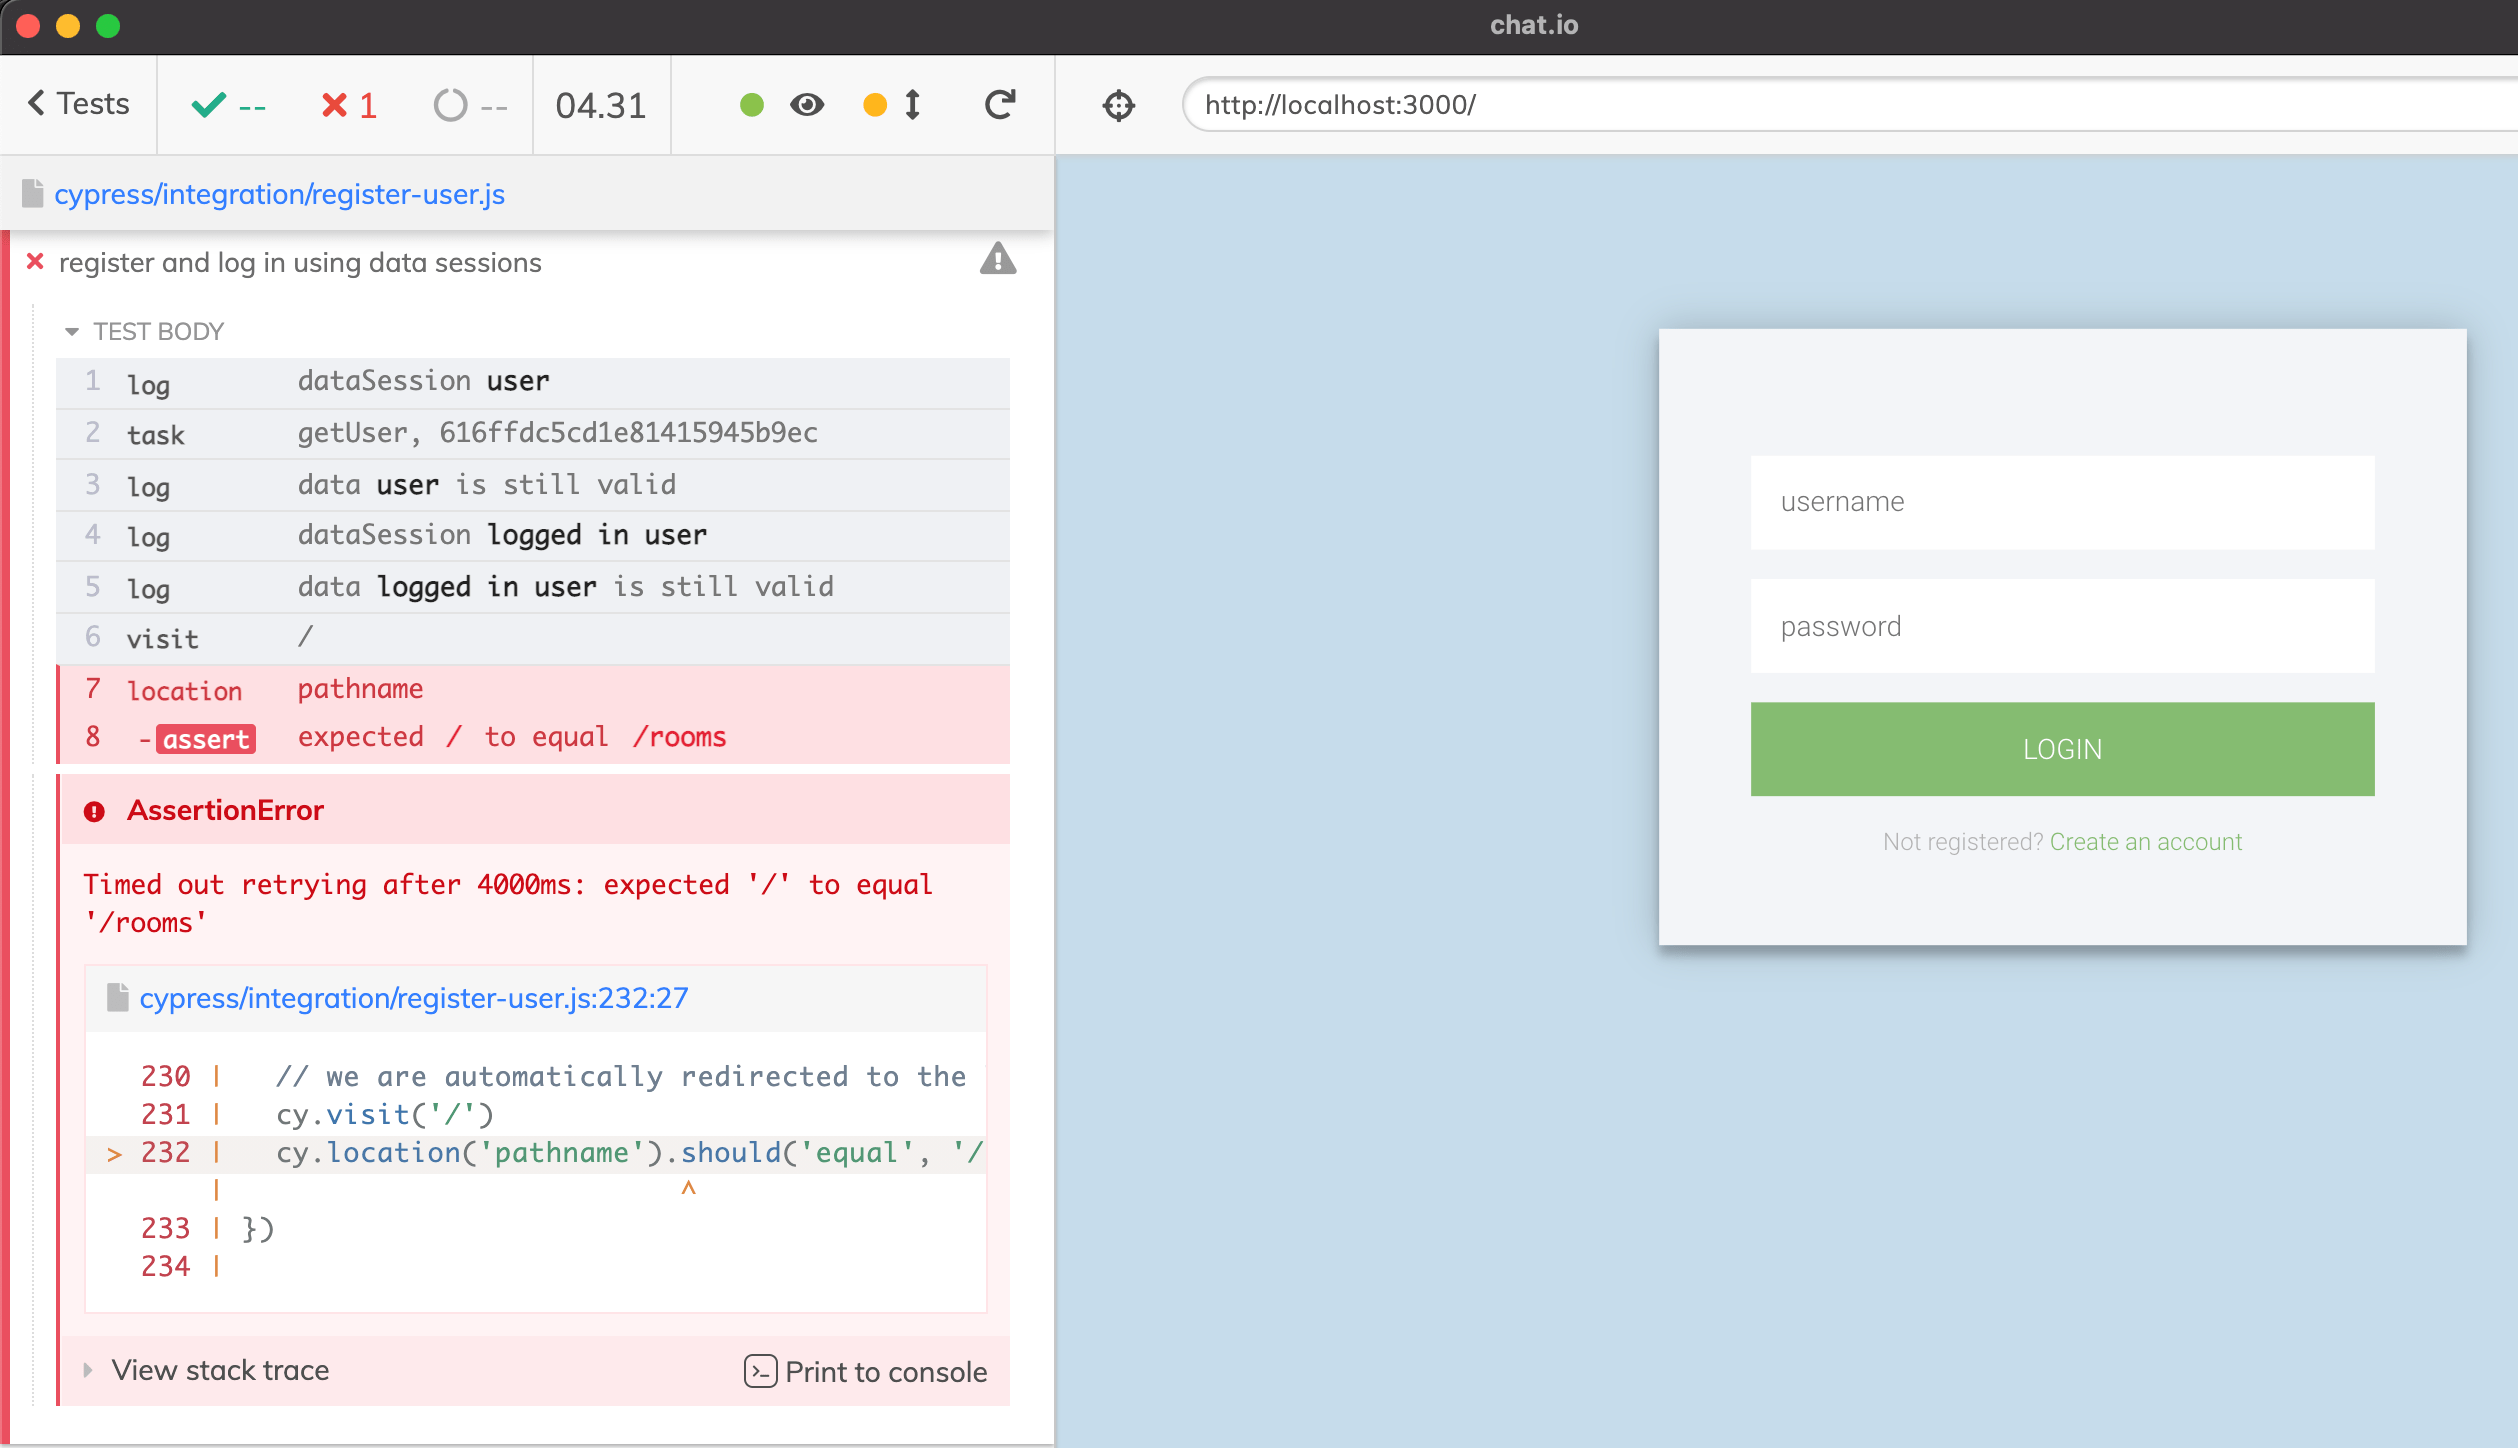 The user was redirected back to the login page